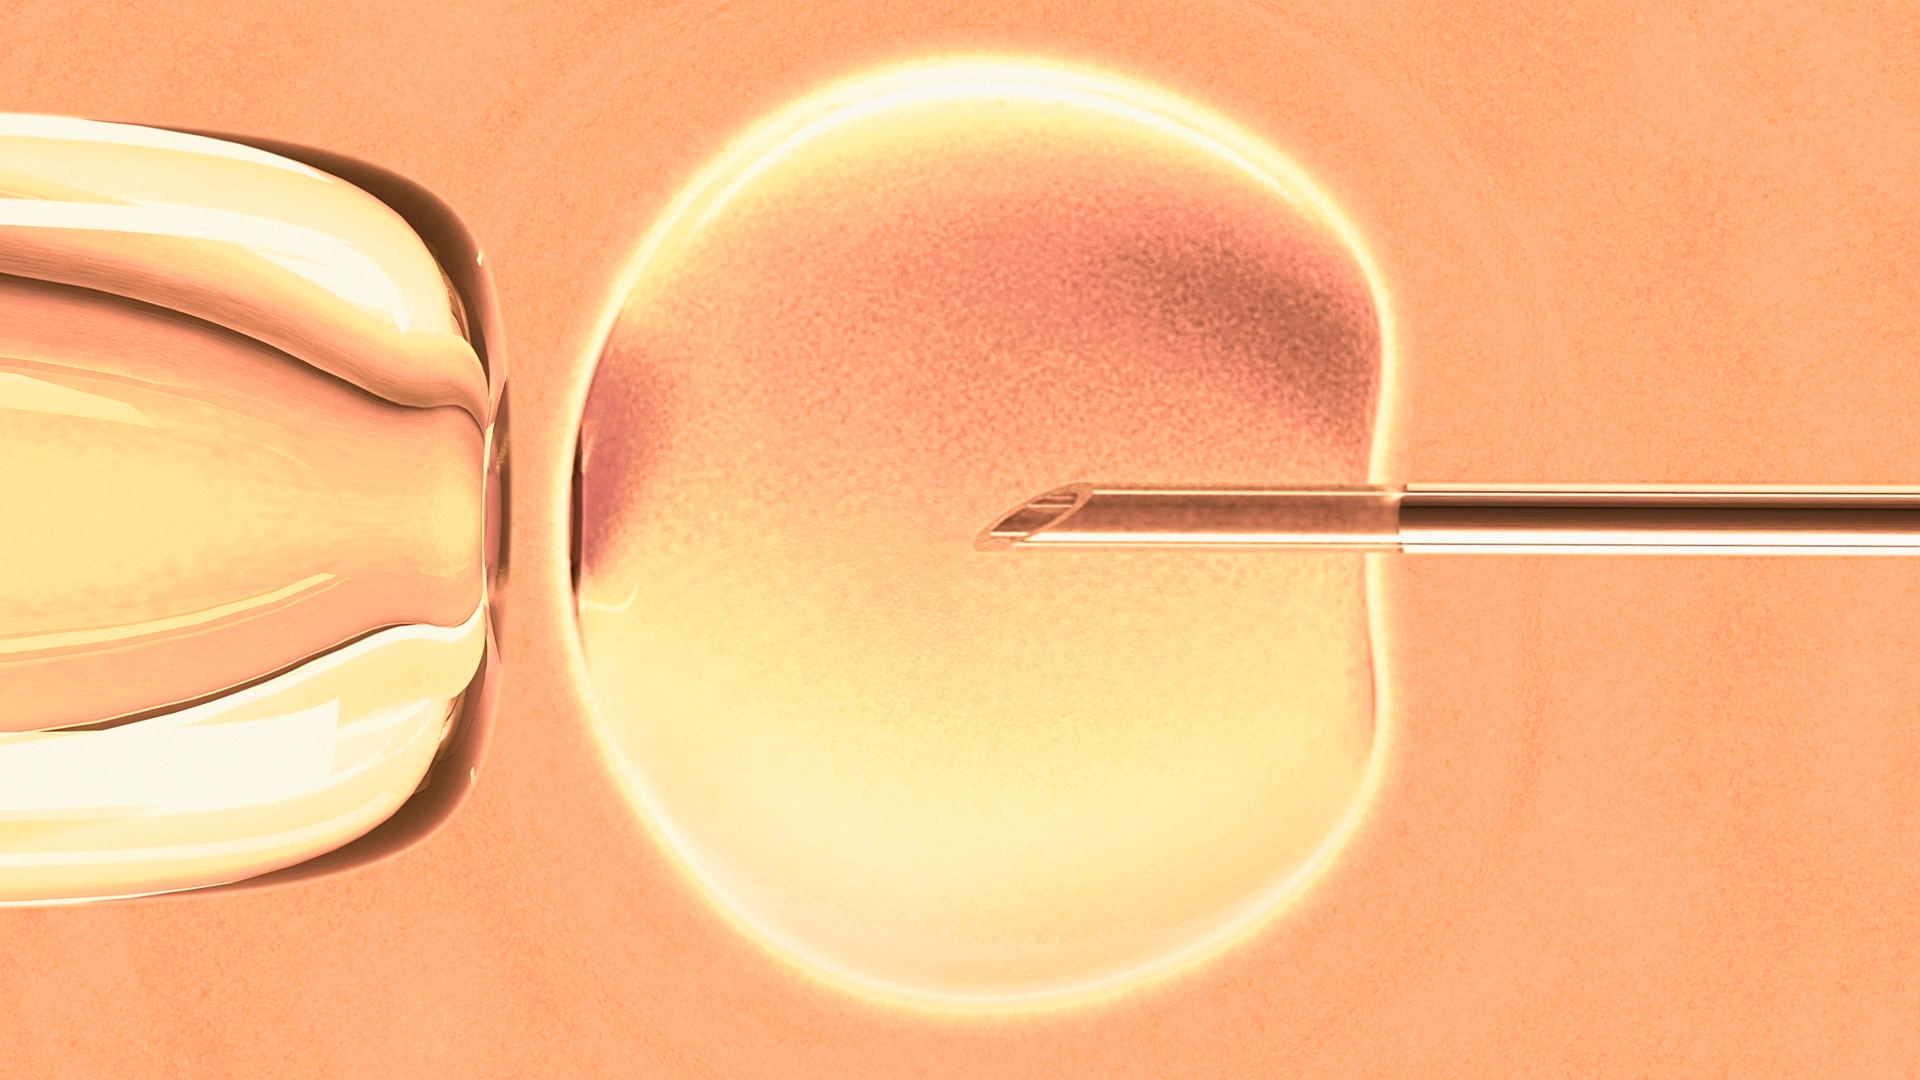 An illustration of in vitro fertilization, in which a single sperm is injected into an egg to create an embryo.